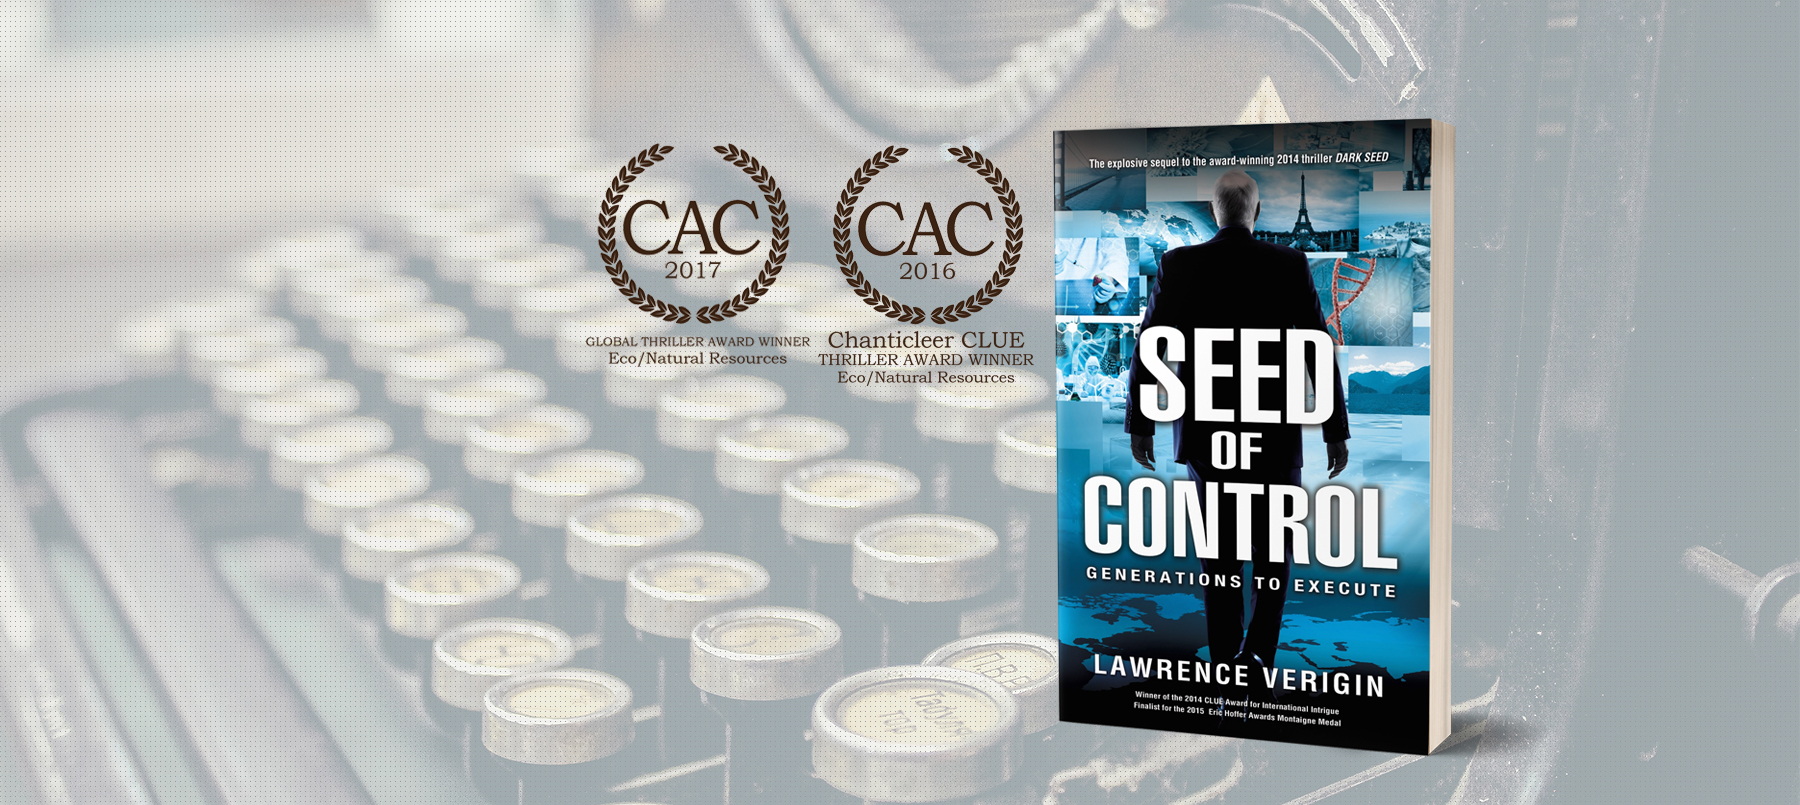 Lawrence Verigin - author of Seed of Control